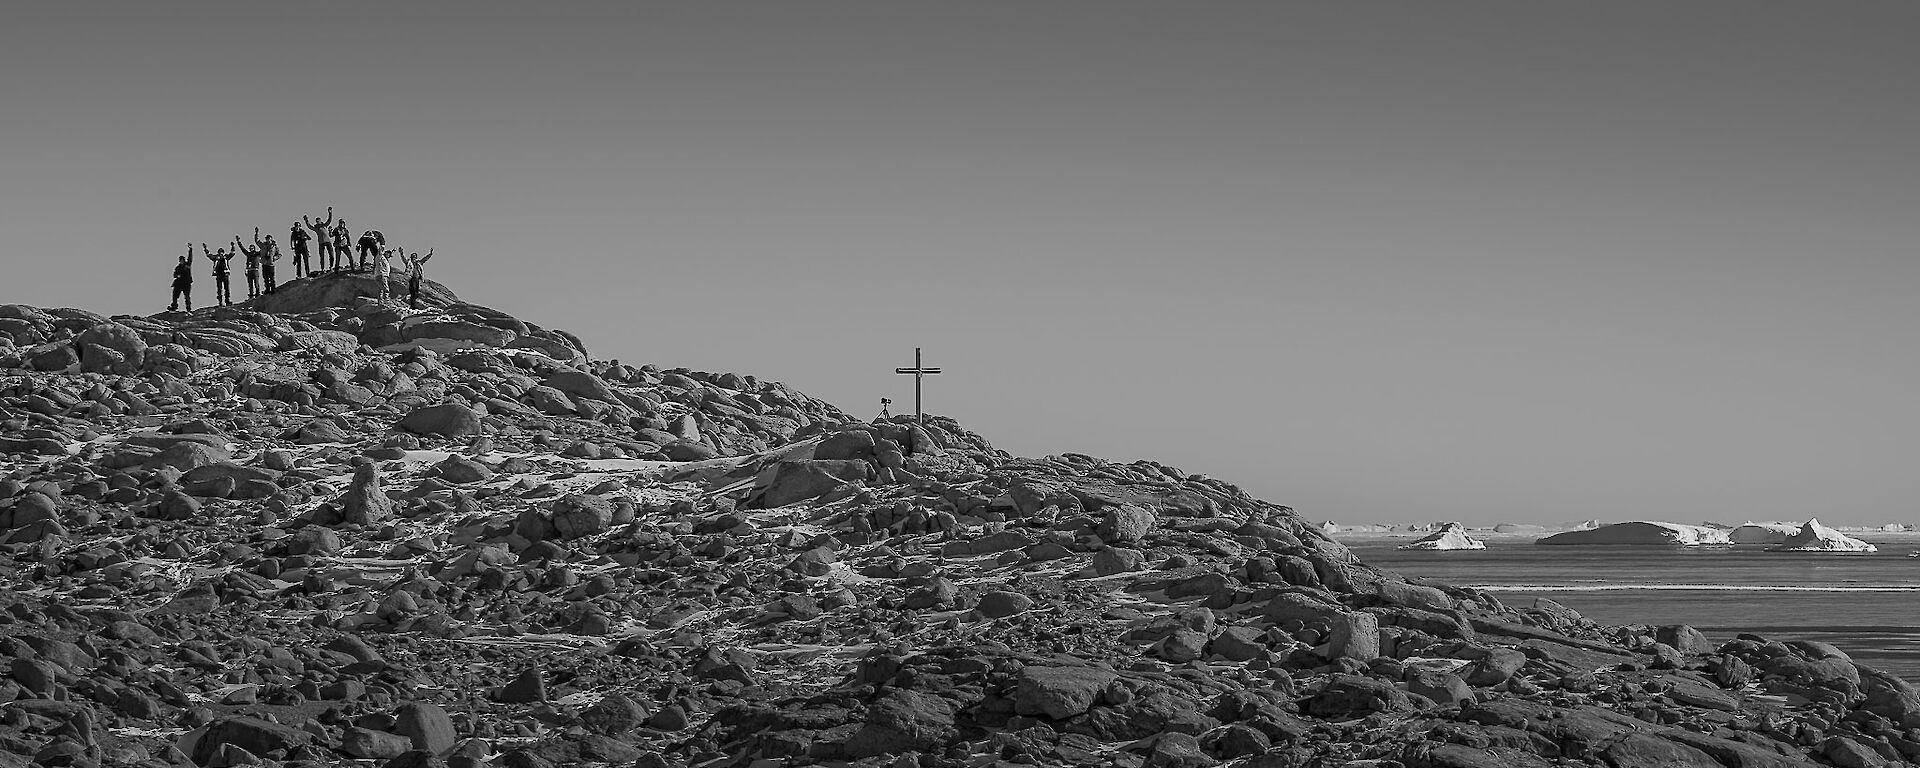 Rocky hill with cross on top with expeditioners sillouetted against the horizen